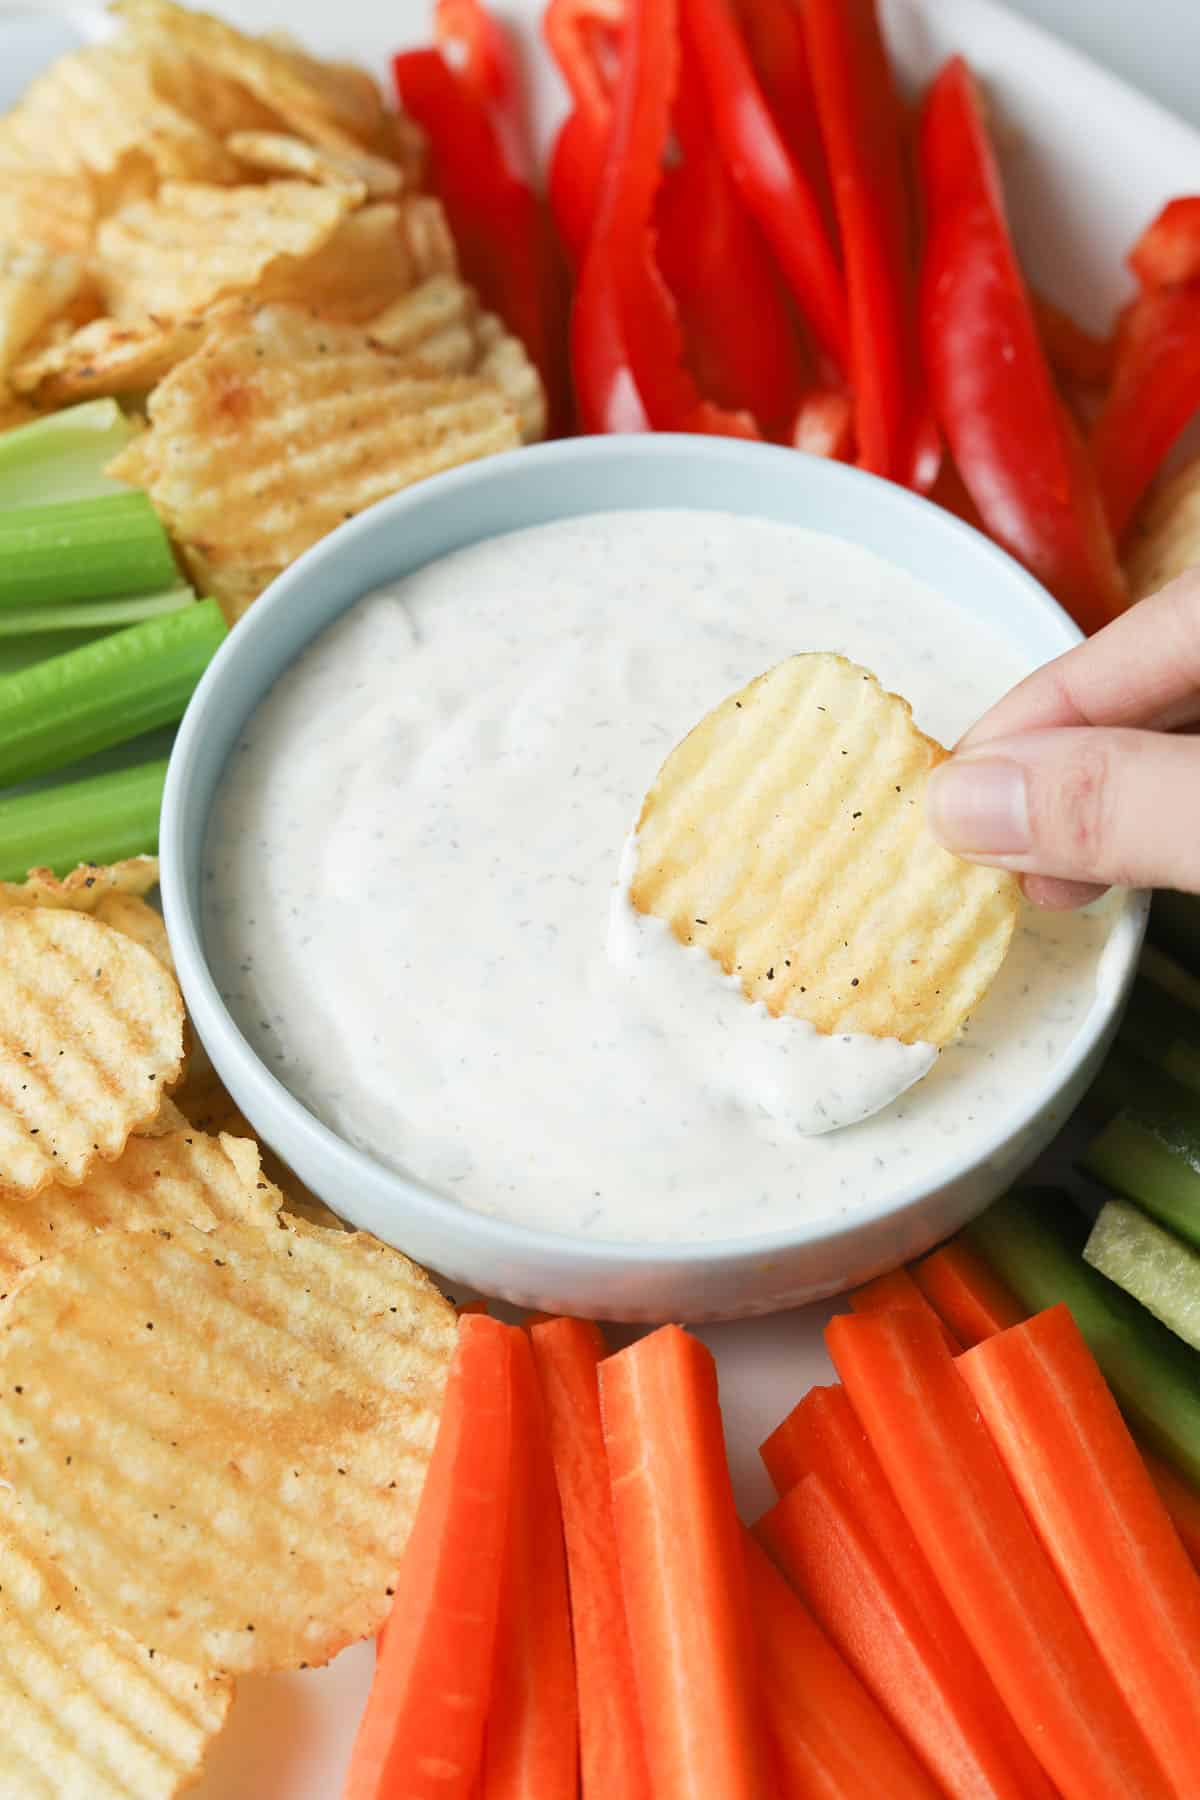 chip dipping in ranch.